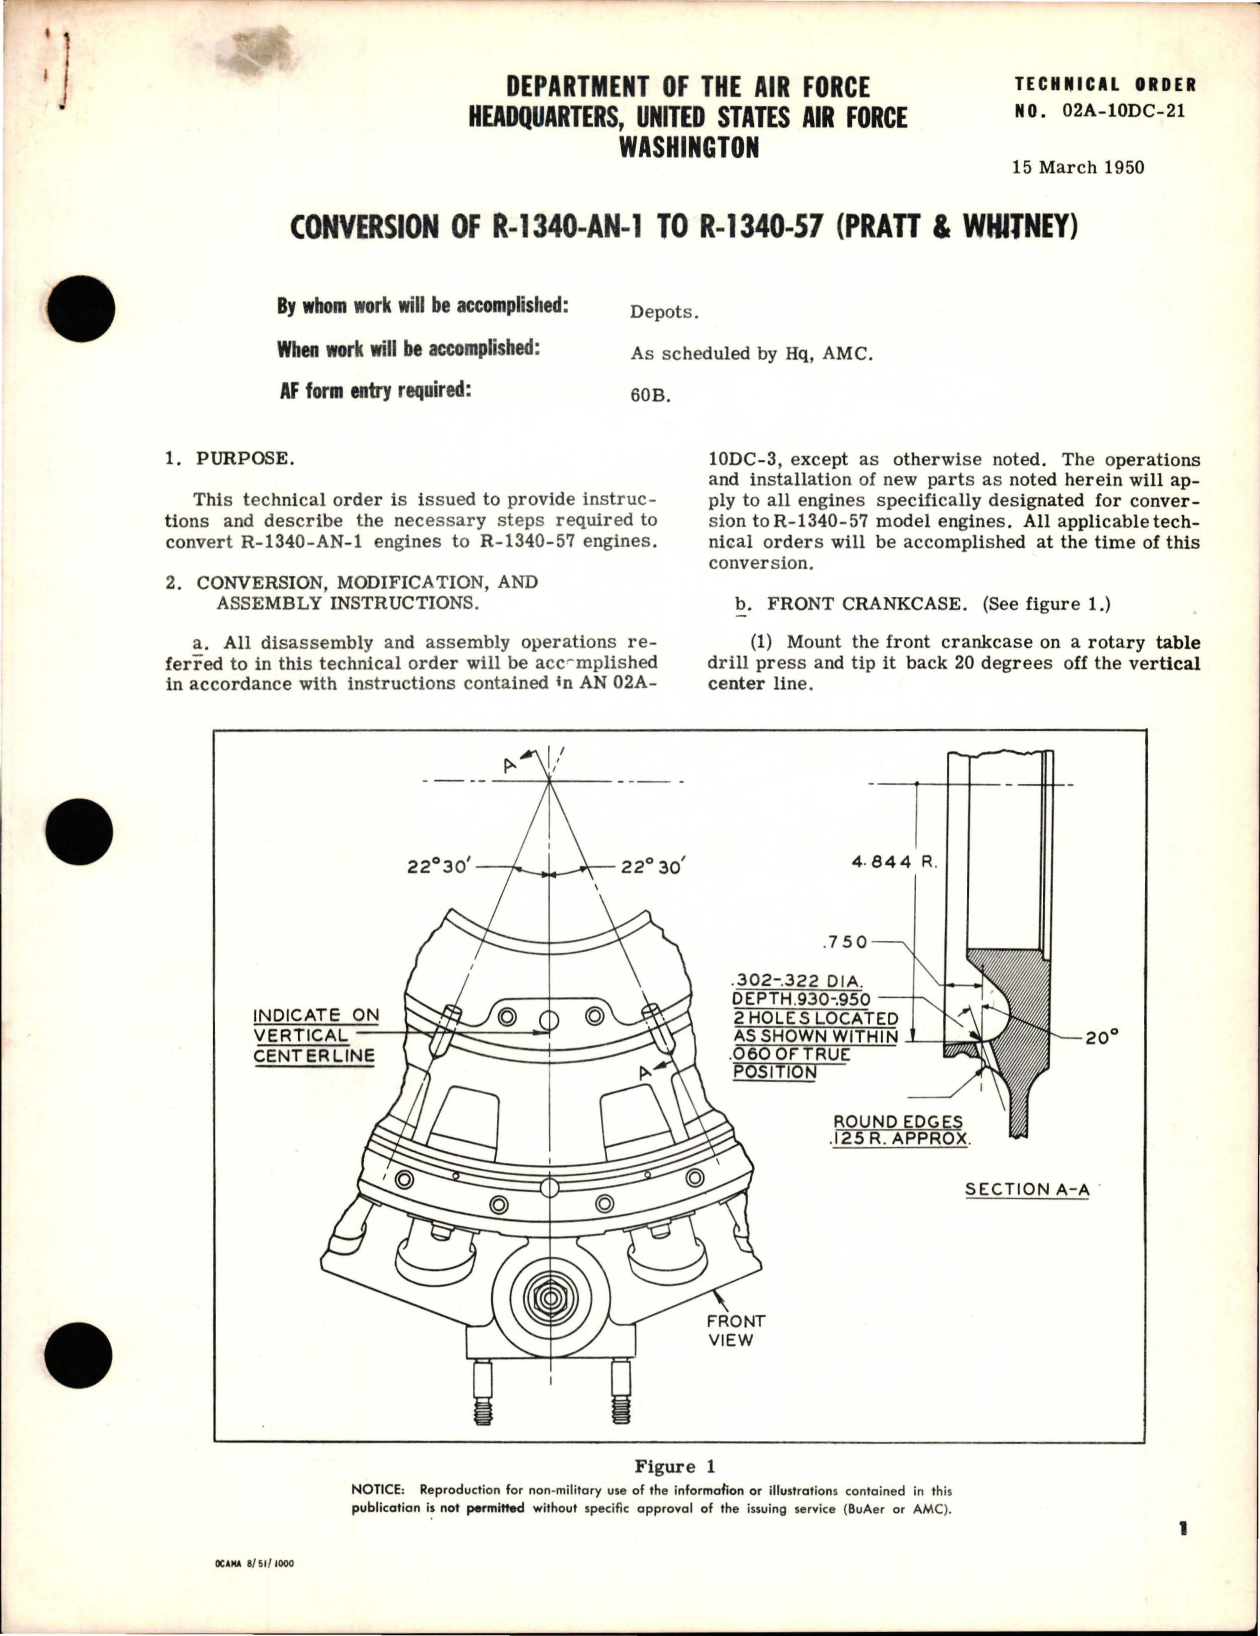 Sample page 1 from AirCorps Library document: Conversion of R-1340-AN-1 to R-1340-57 